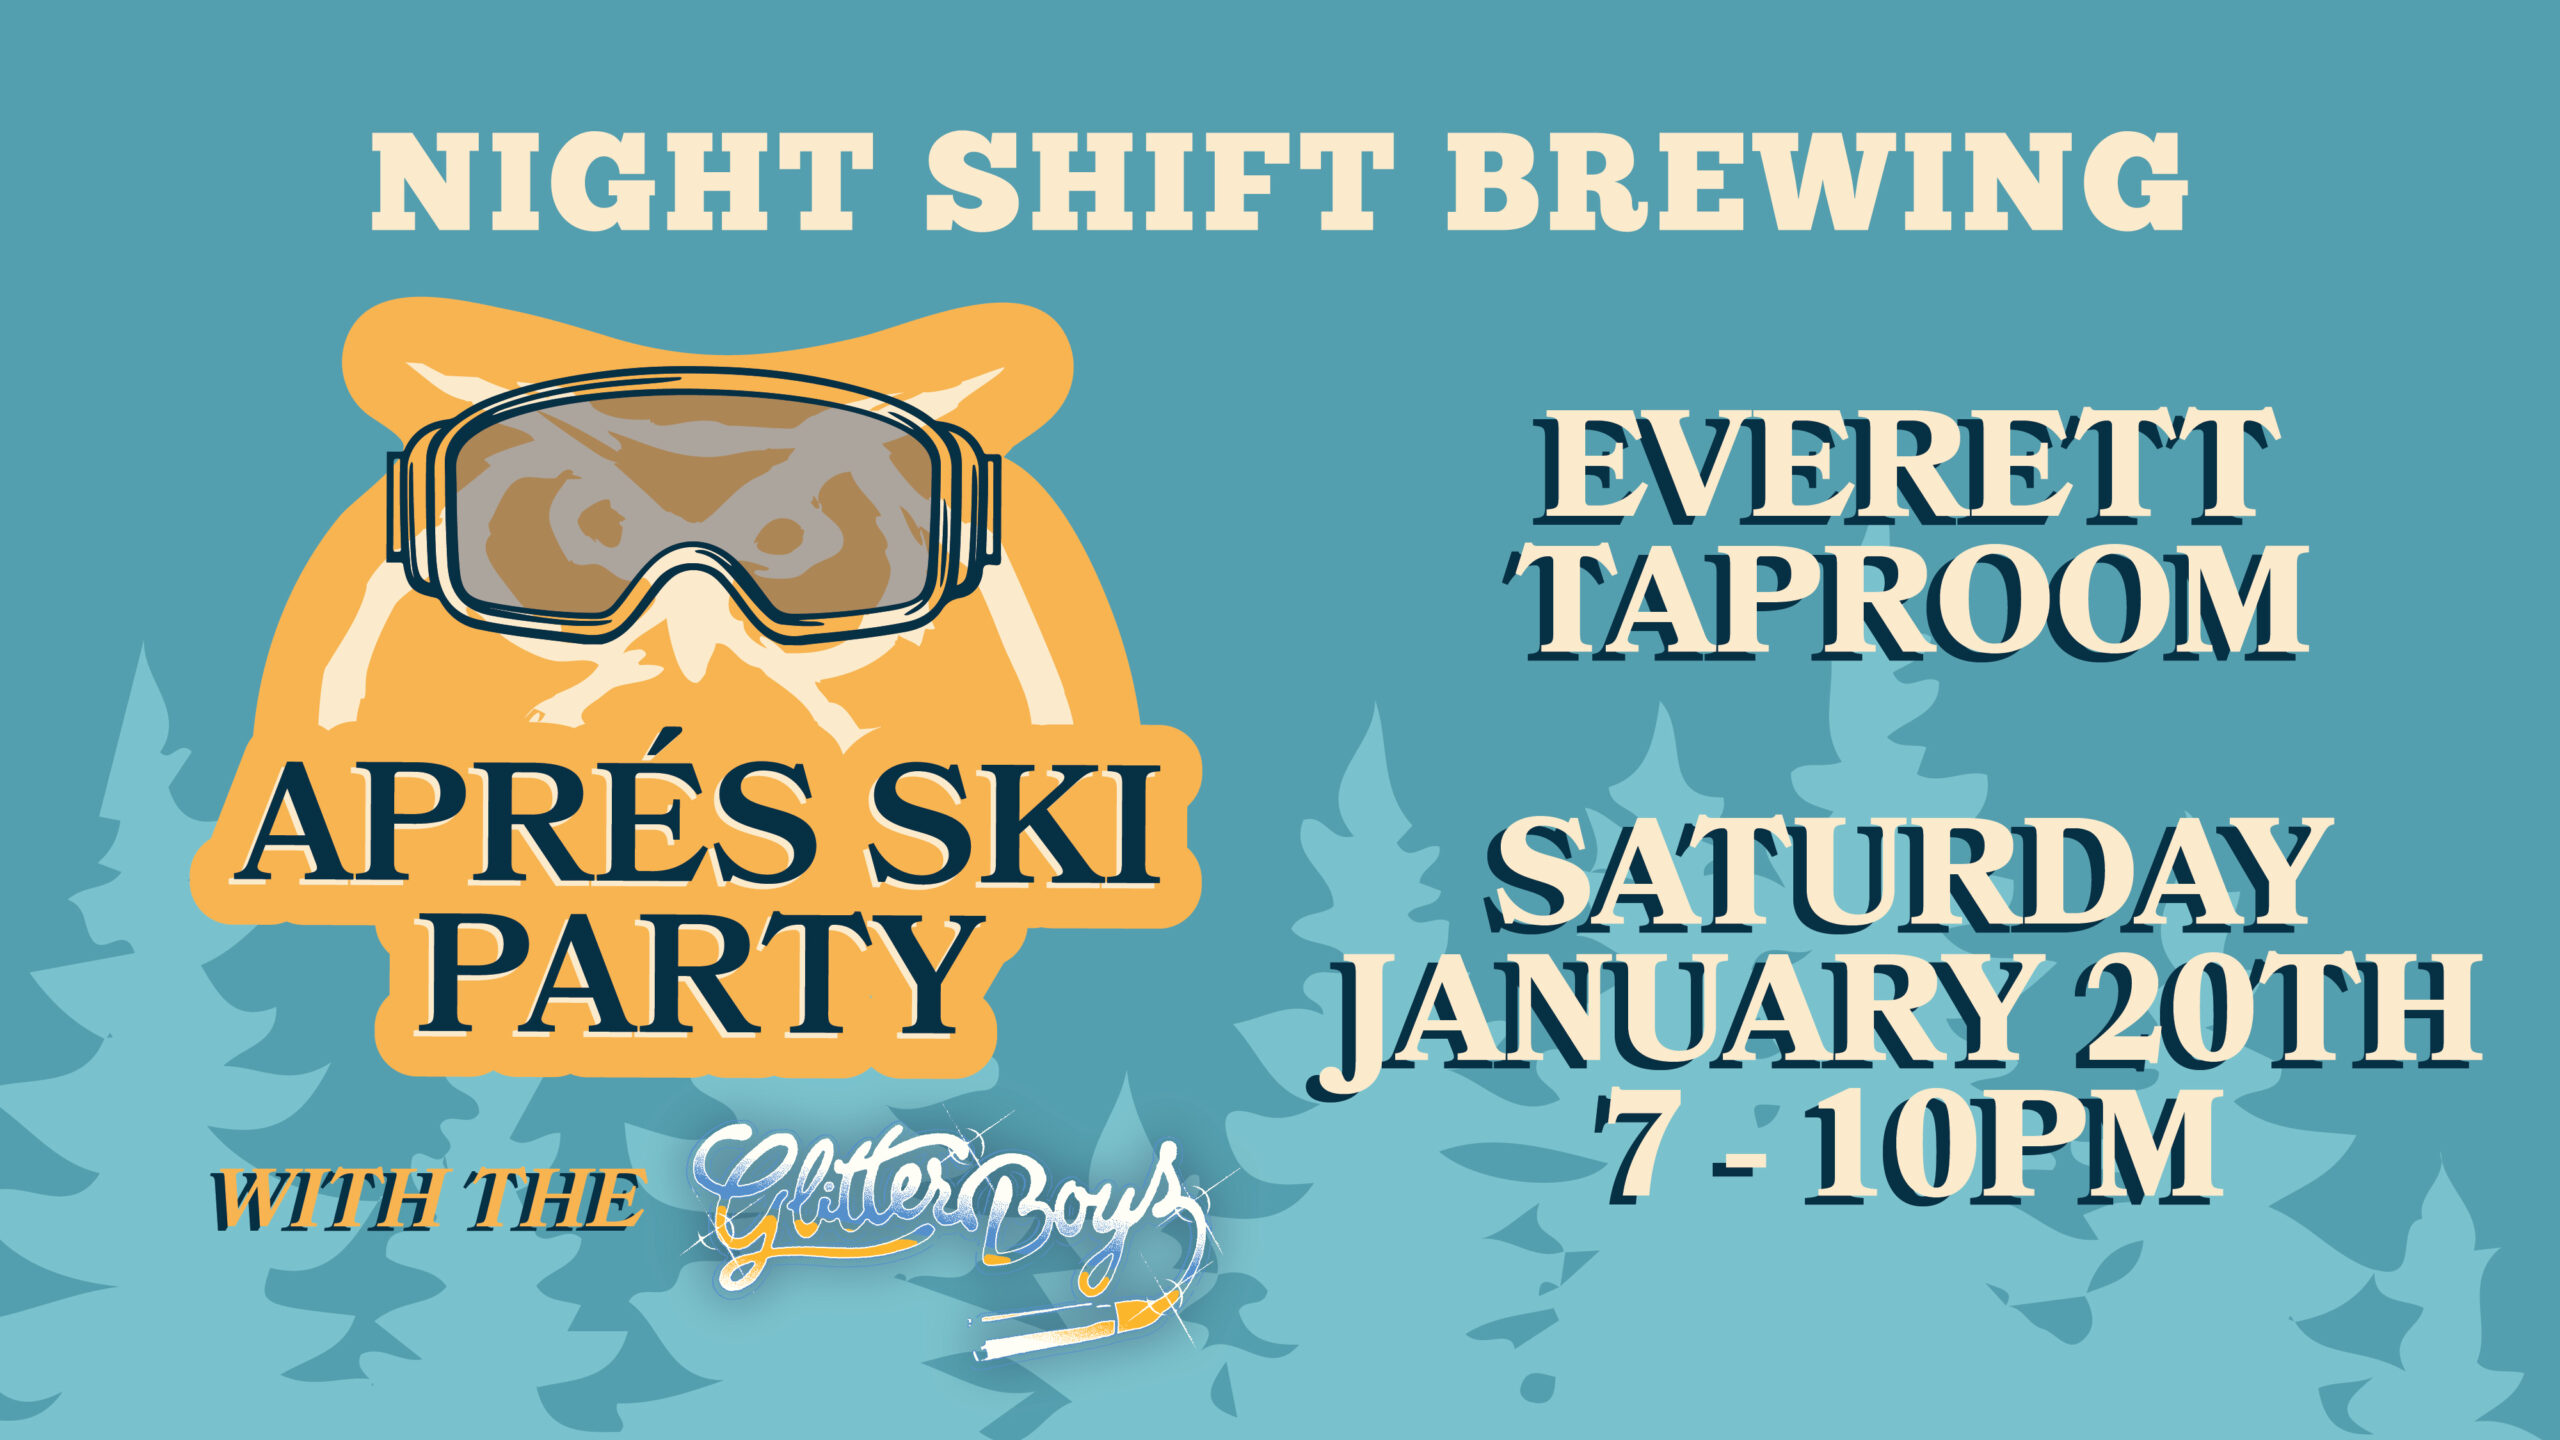 Apres Ski Party with The Glitter Boys - Night Shift Brewing